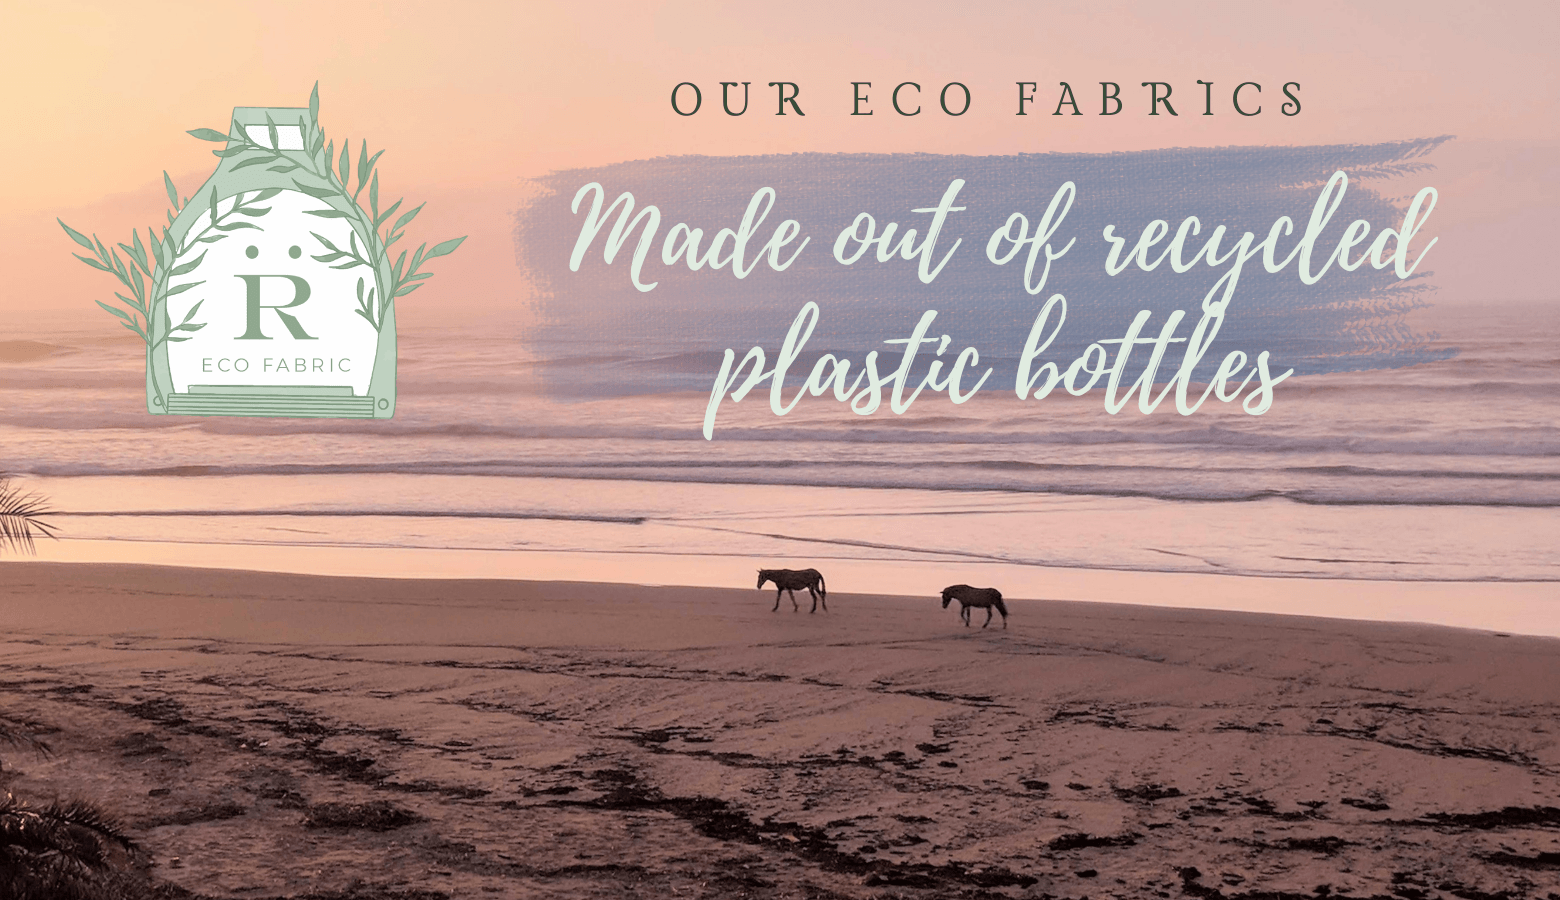 Our Eco Fabrics - made out of recycled plastic bottles